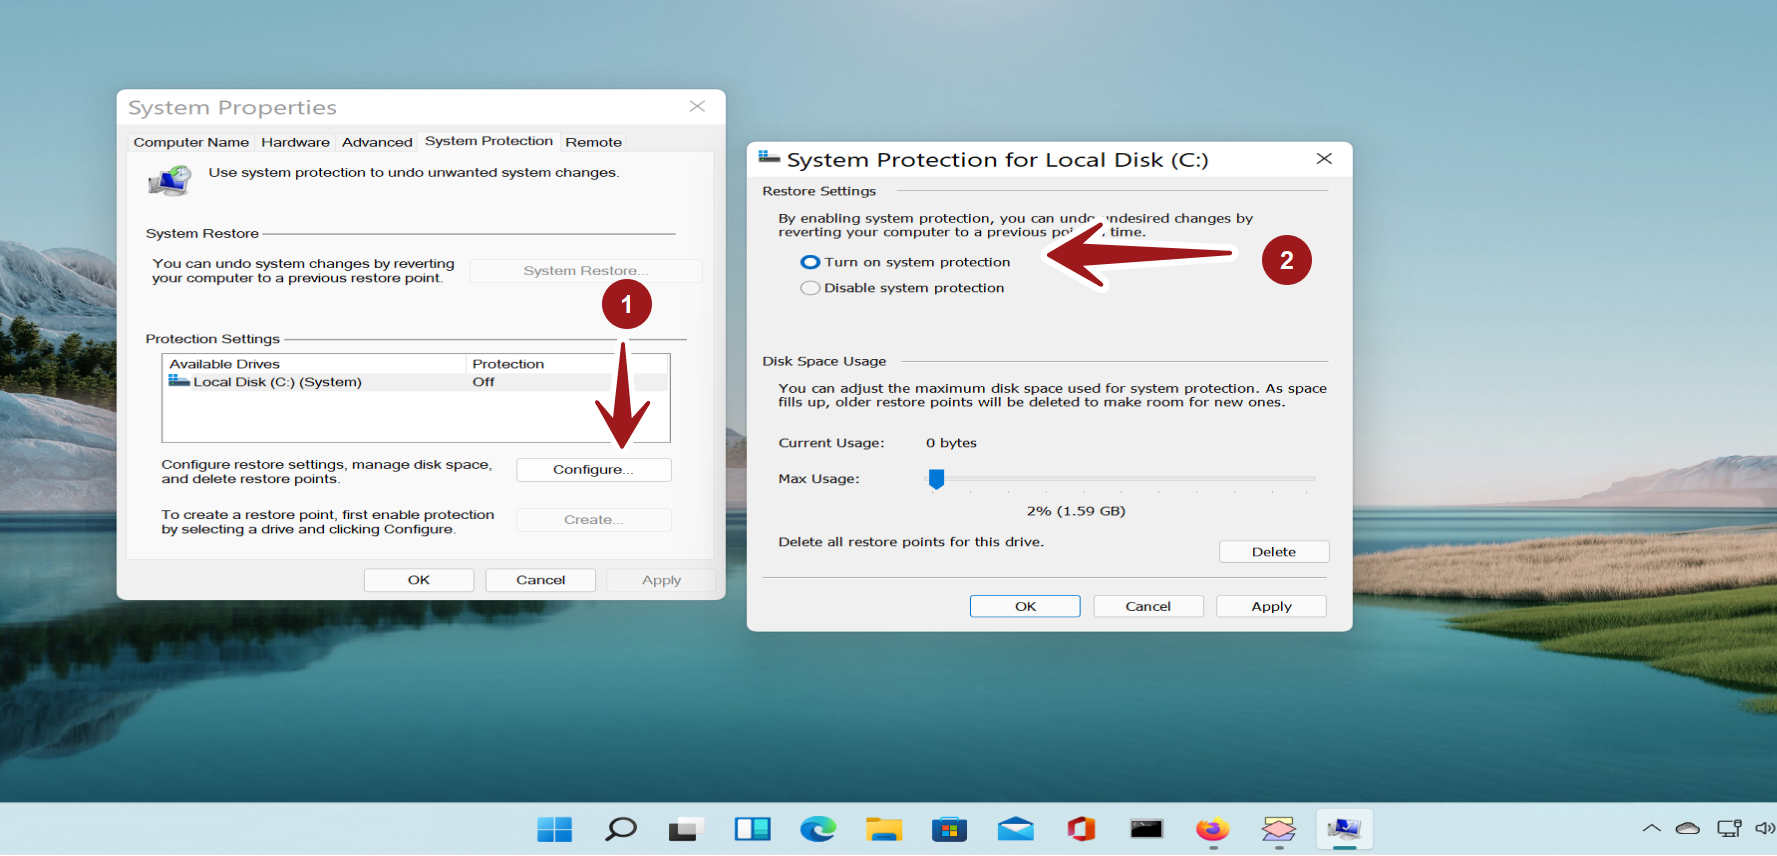 System Protection Restore Settings